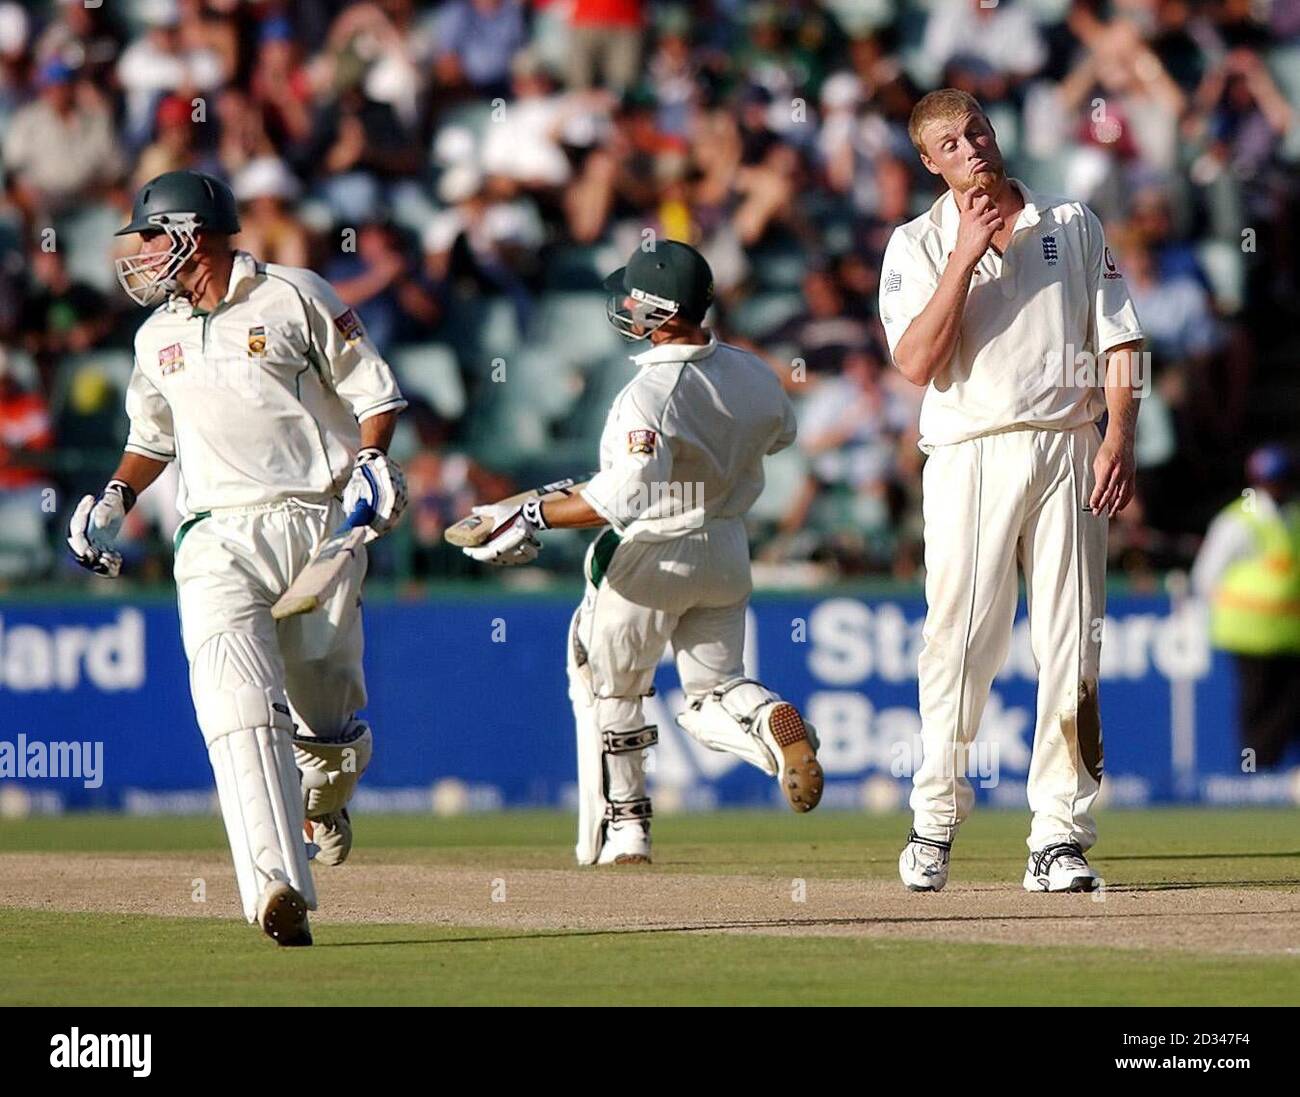 England's Andrew Flintoff (right) reacts as South Africa's herschelle Gibbs (left) and Mark Boucher score runs off his bowling Stock Photo